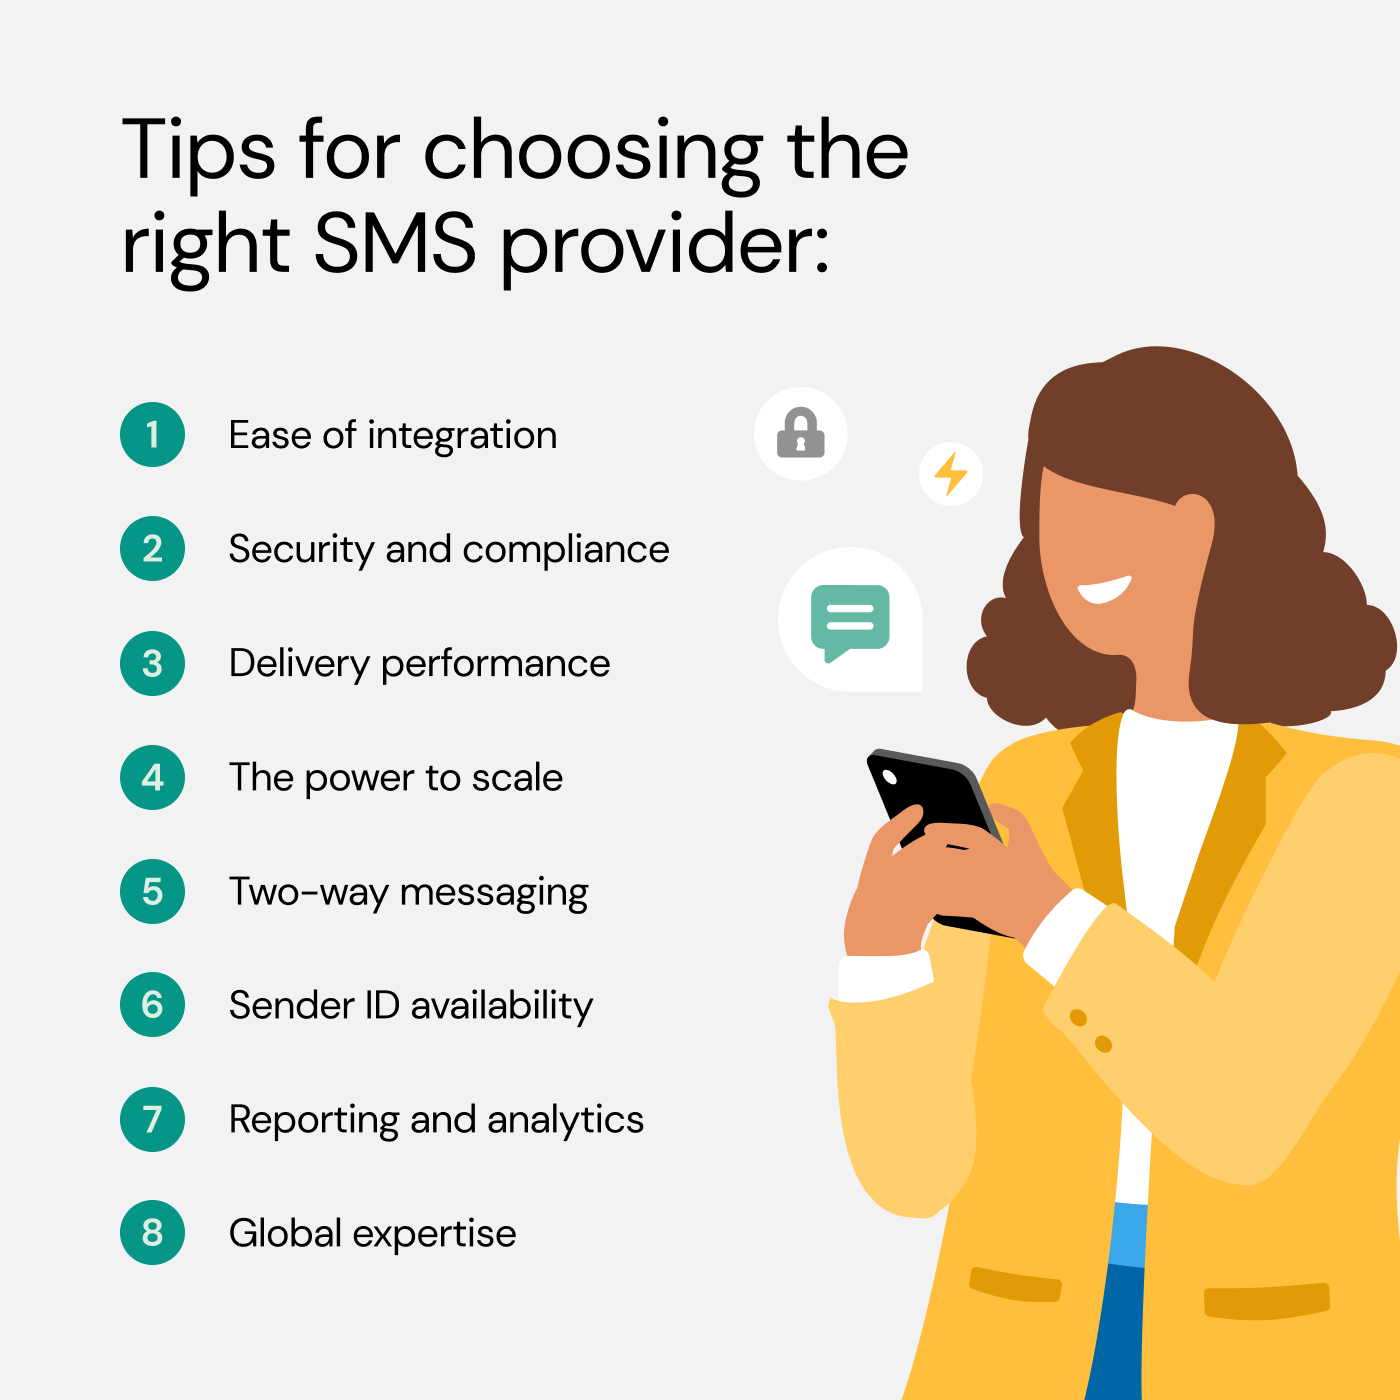 Eight tips for choosing the right SMS provider